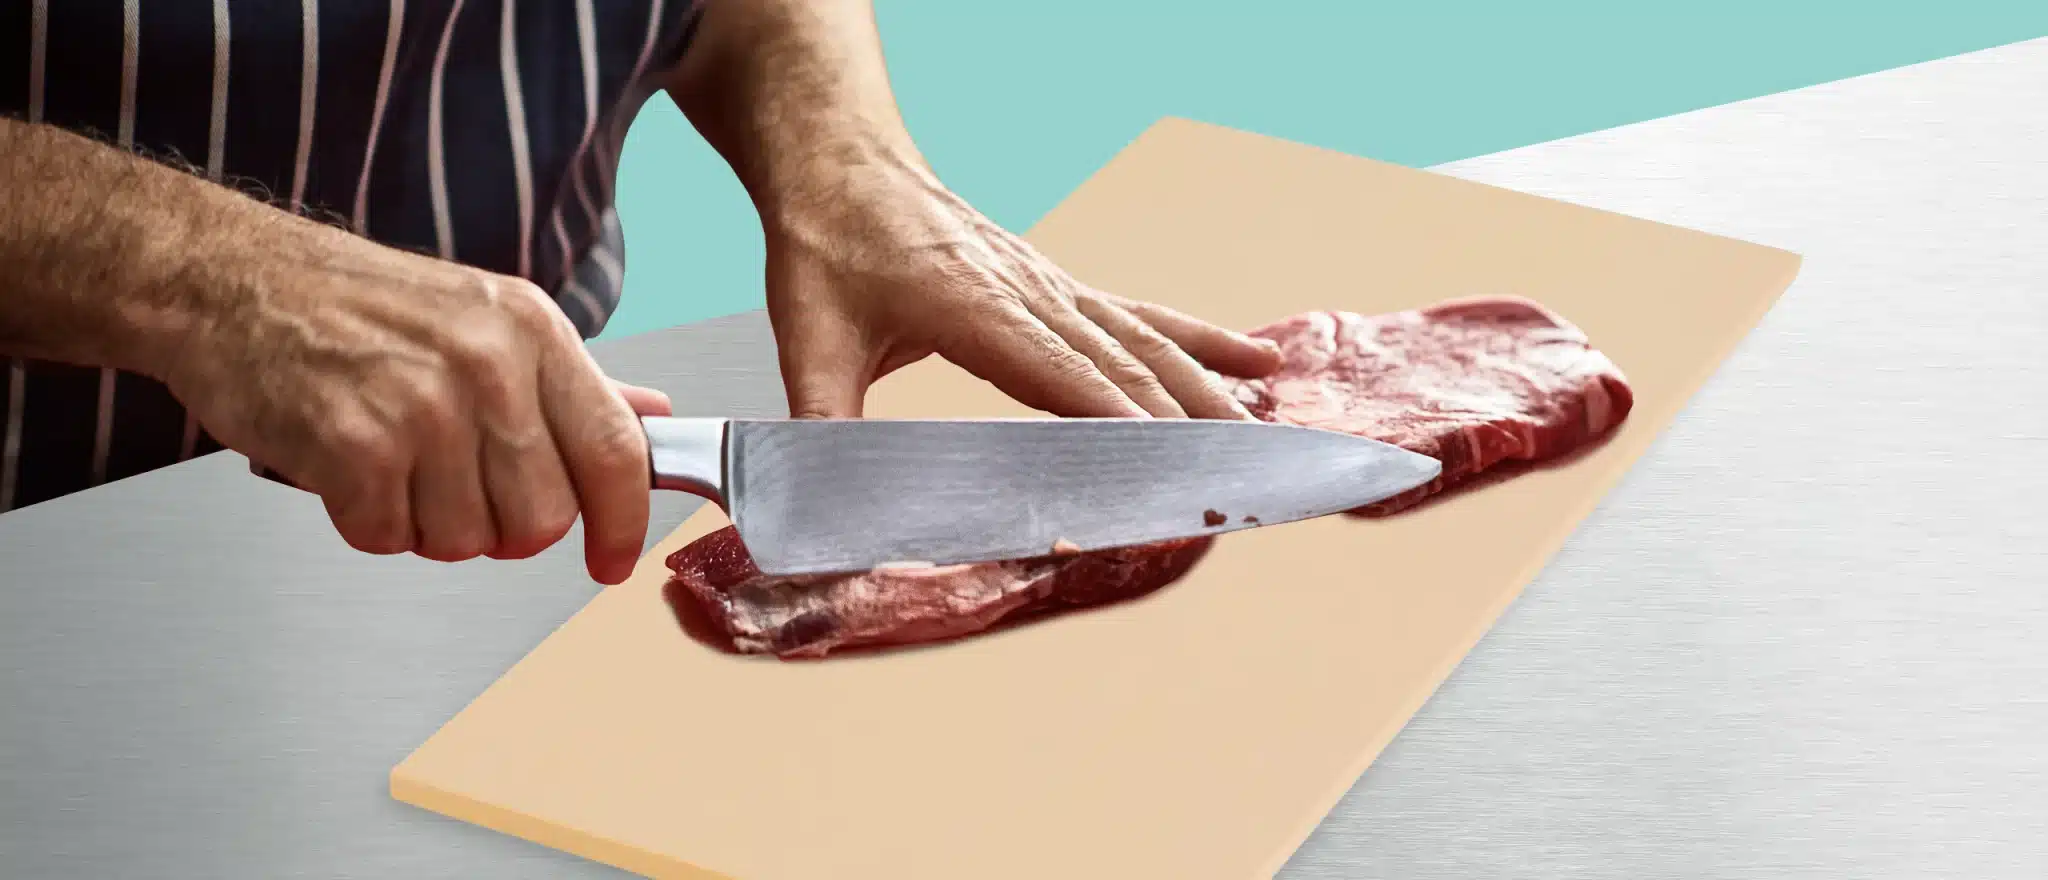 Rubber Cutting Boards Are Cleaner, Safer, and Better than Plastic or Wood—Here’s Why